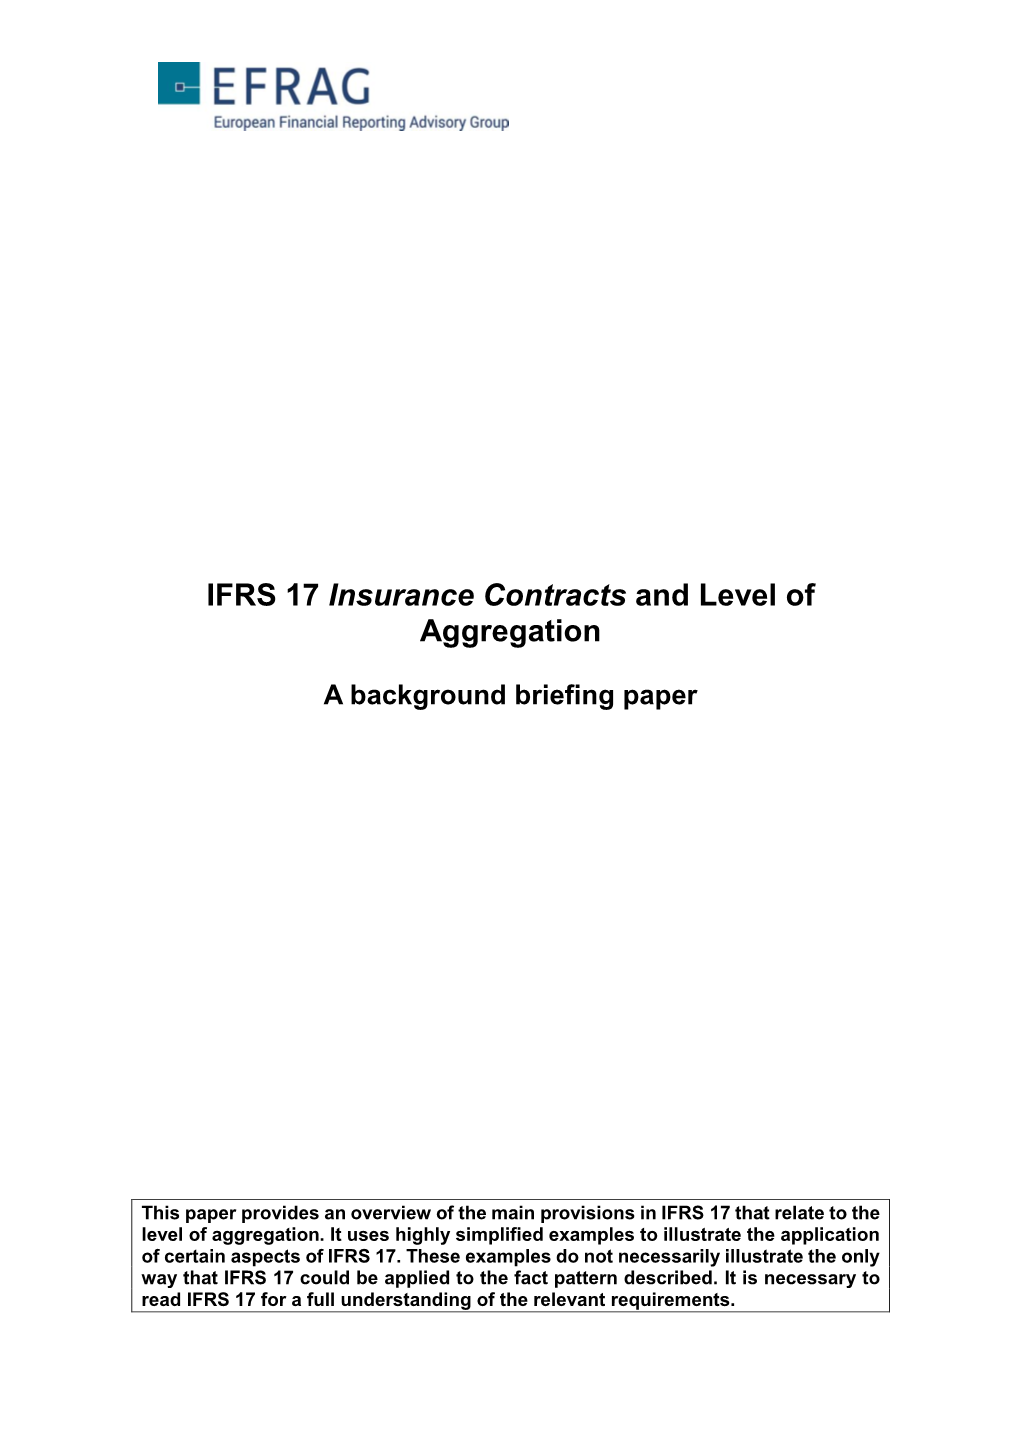 IFRS 17 Insurance Contracts and Level of Aggregation